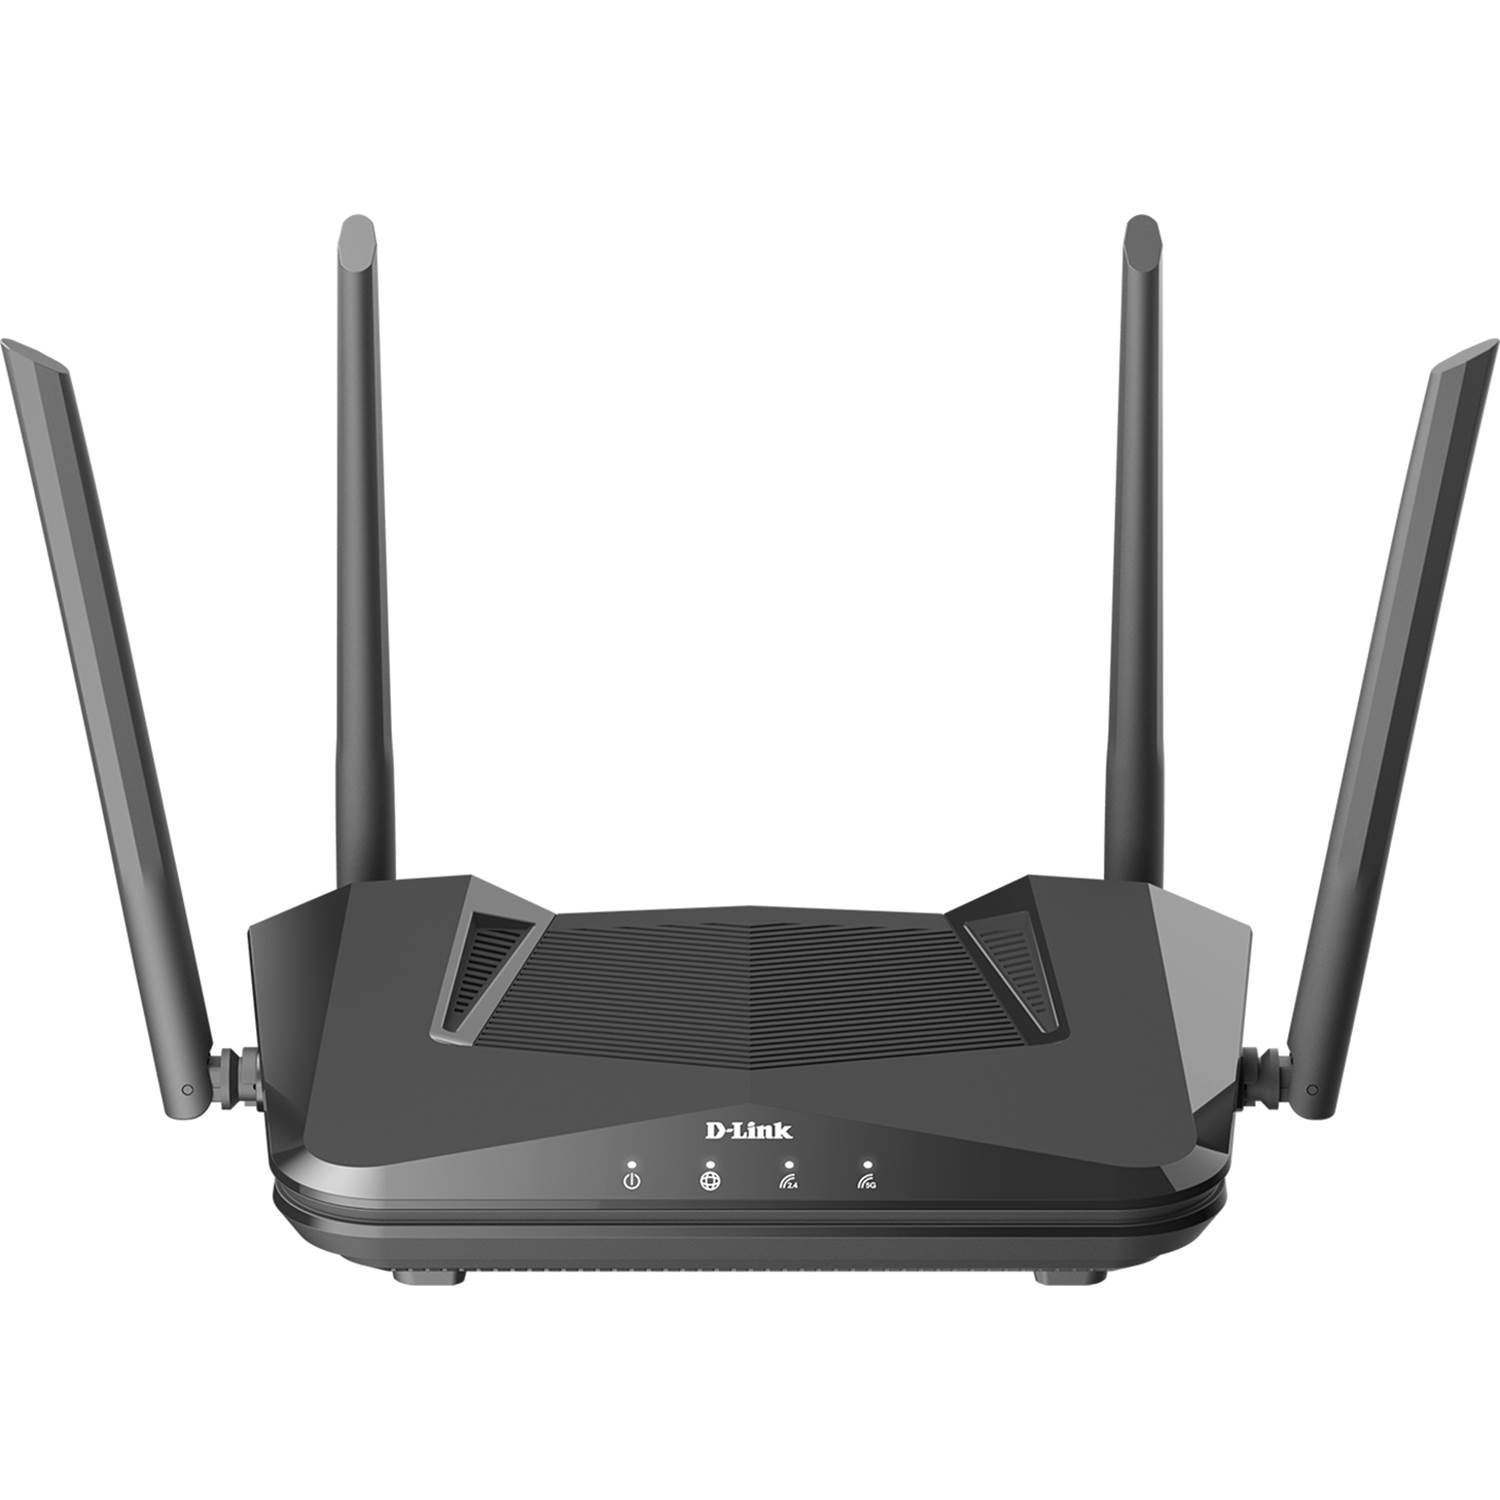 D-Link AX1500 Wi-Fi Router